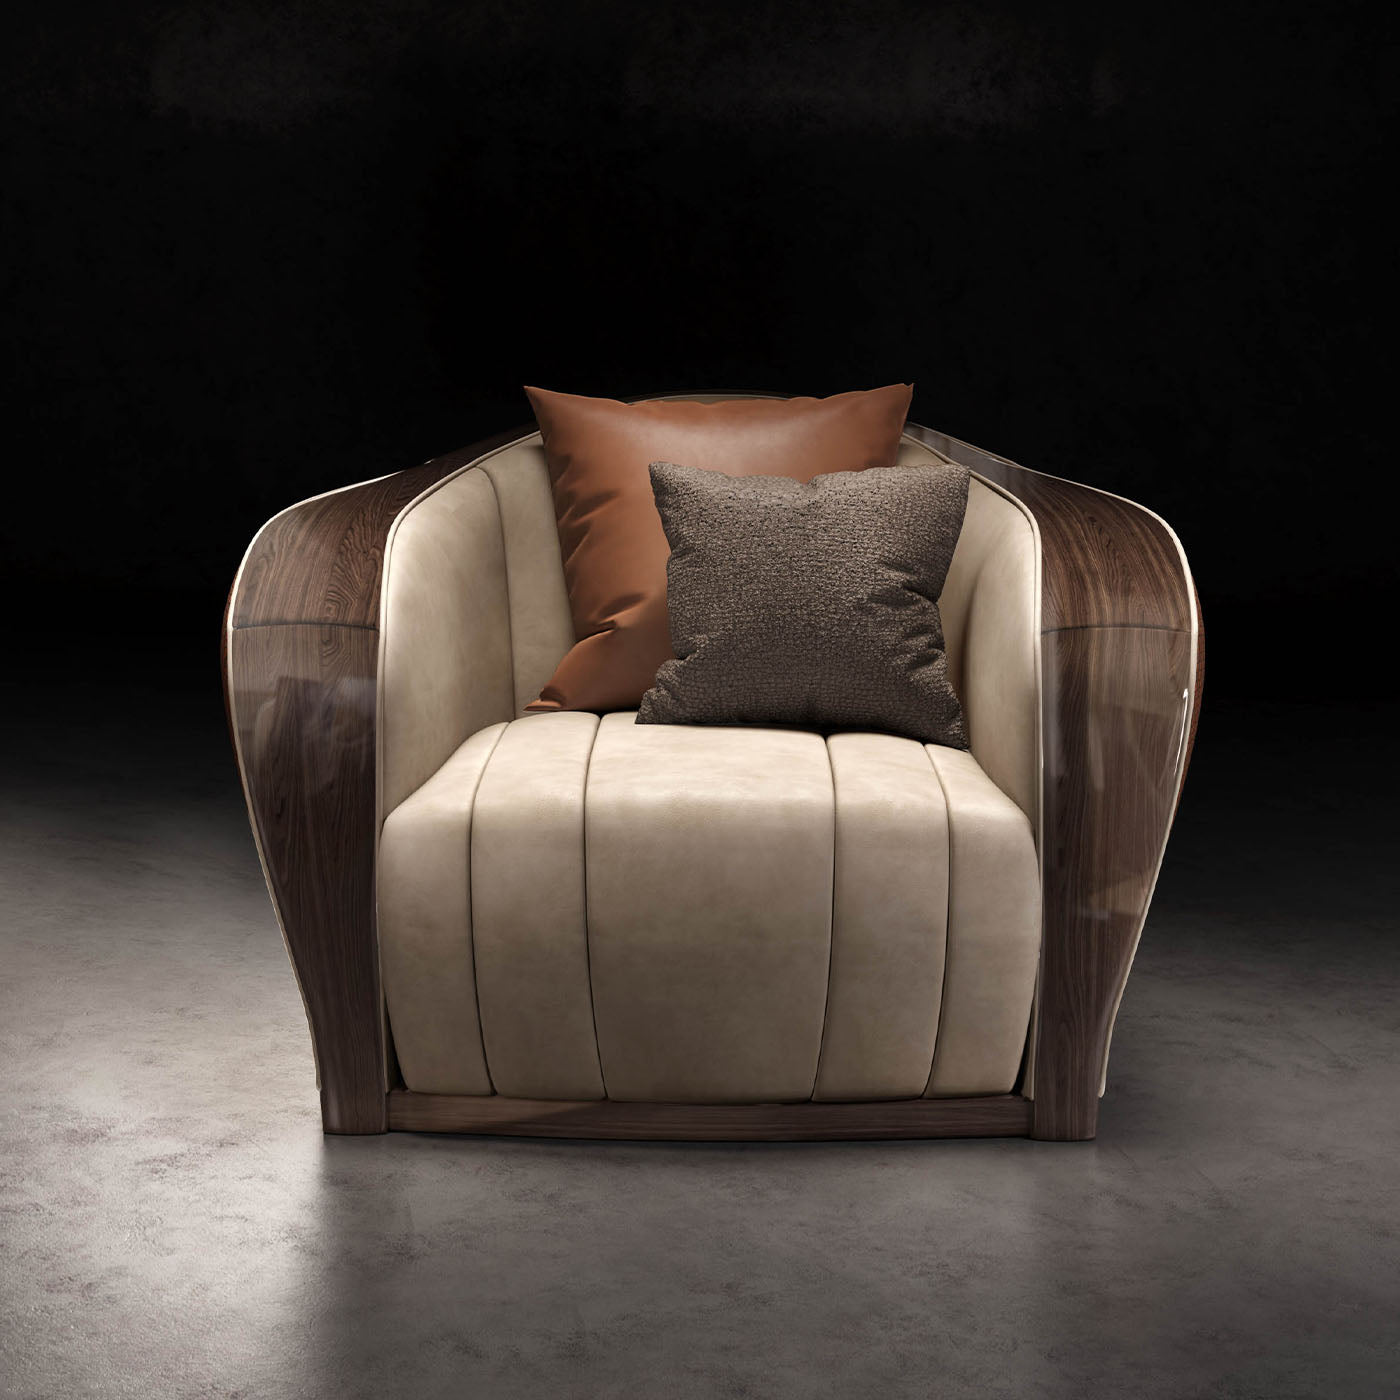 Castagno Channeled Brown-Leather Armchair - Alternative view 1